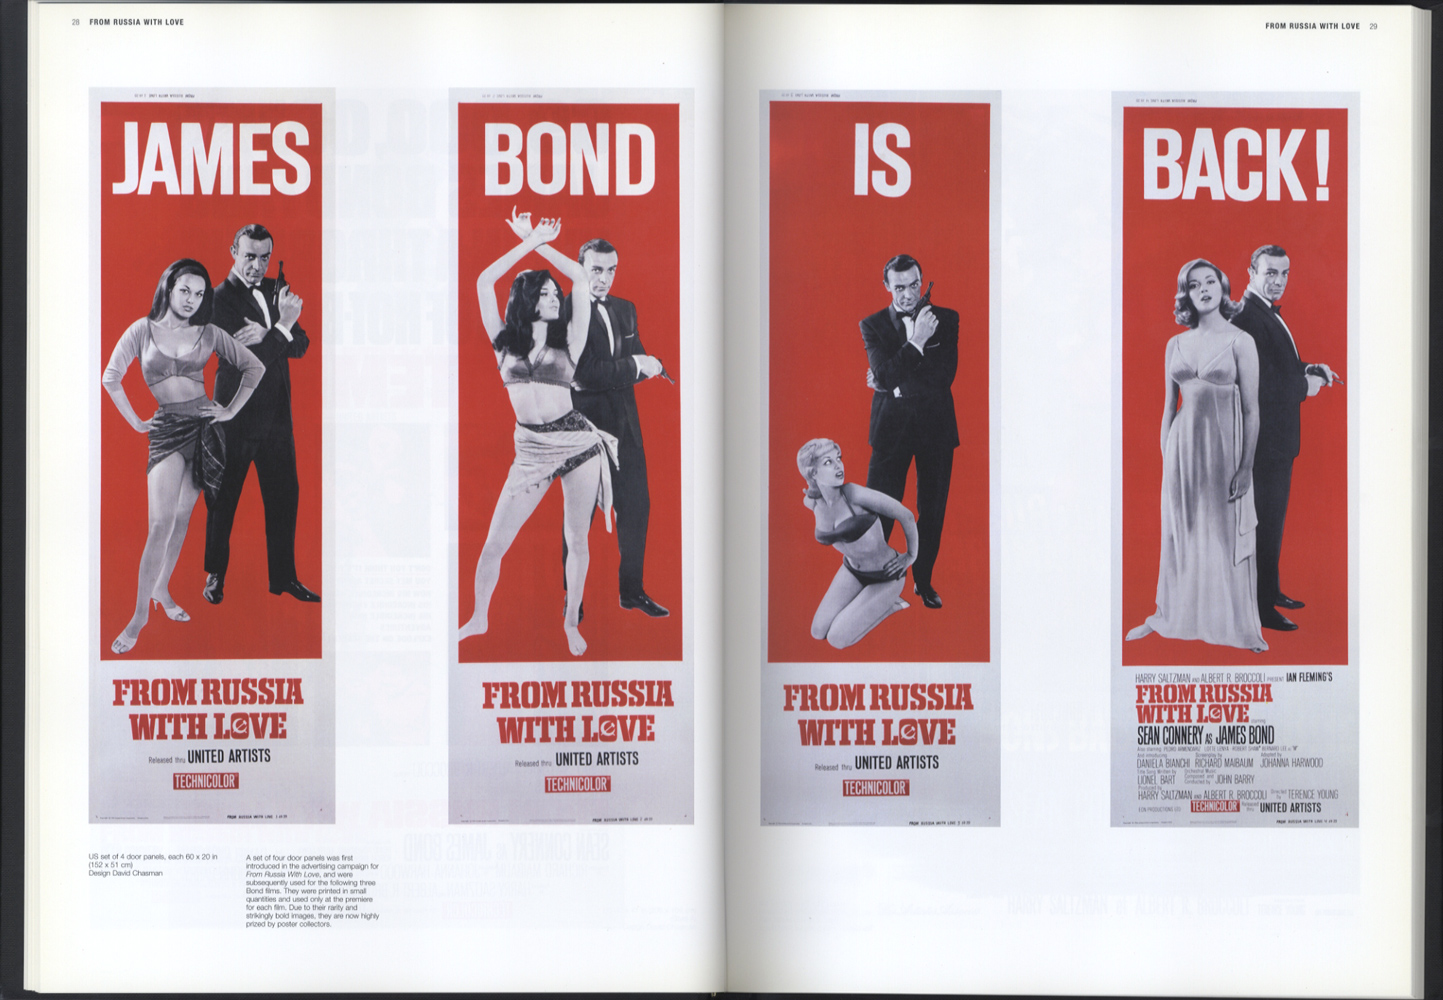 JAMES BOND MOVIE POSTERS　THE OFFICIAL 007 COLLECTION［image3］